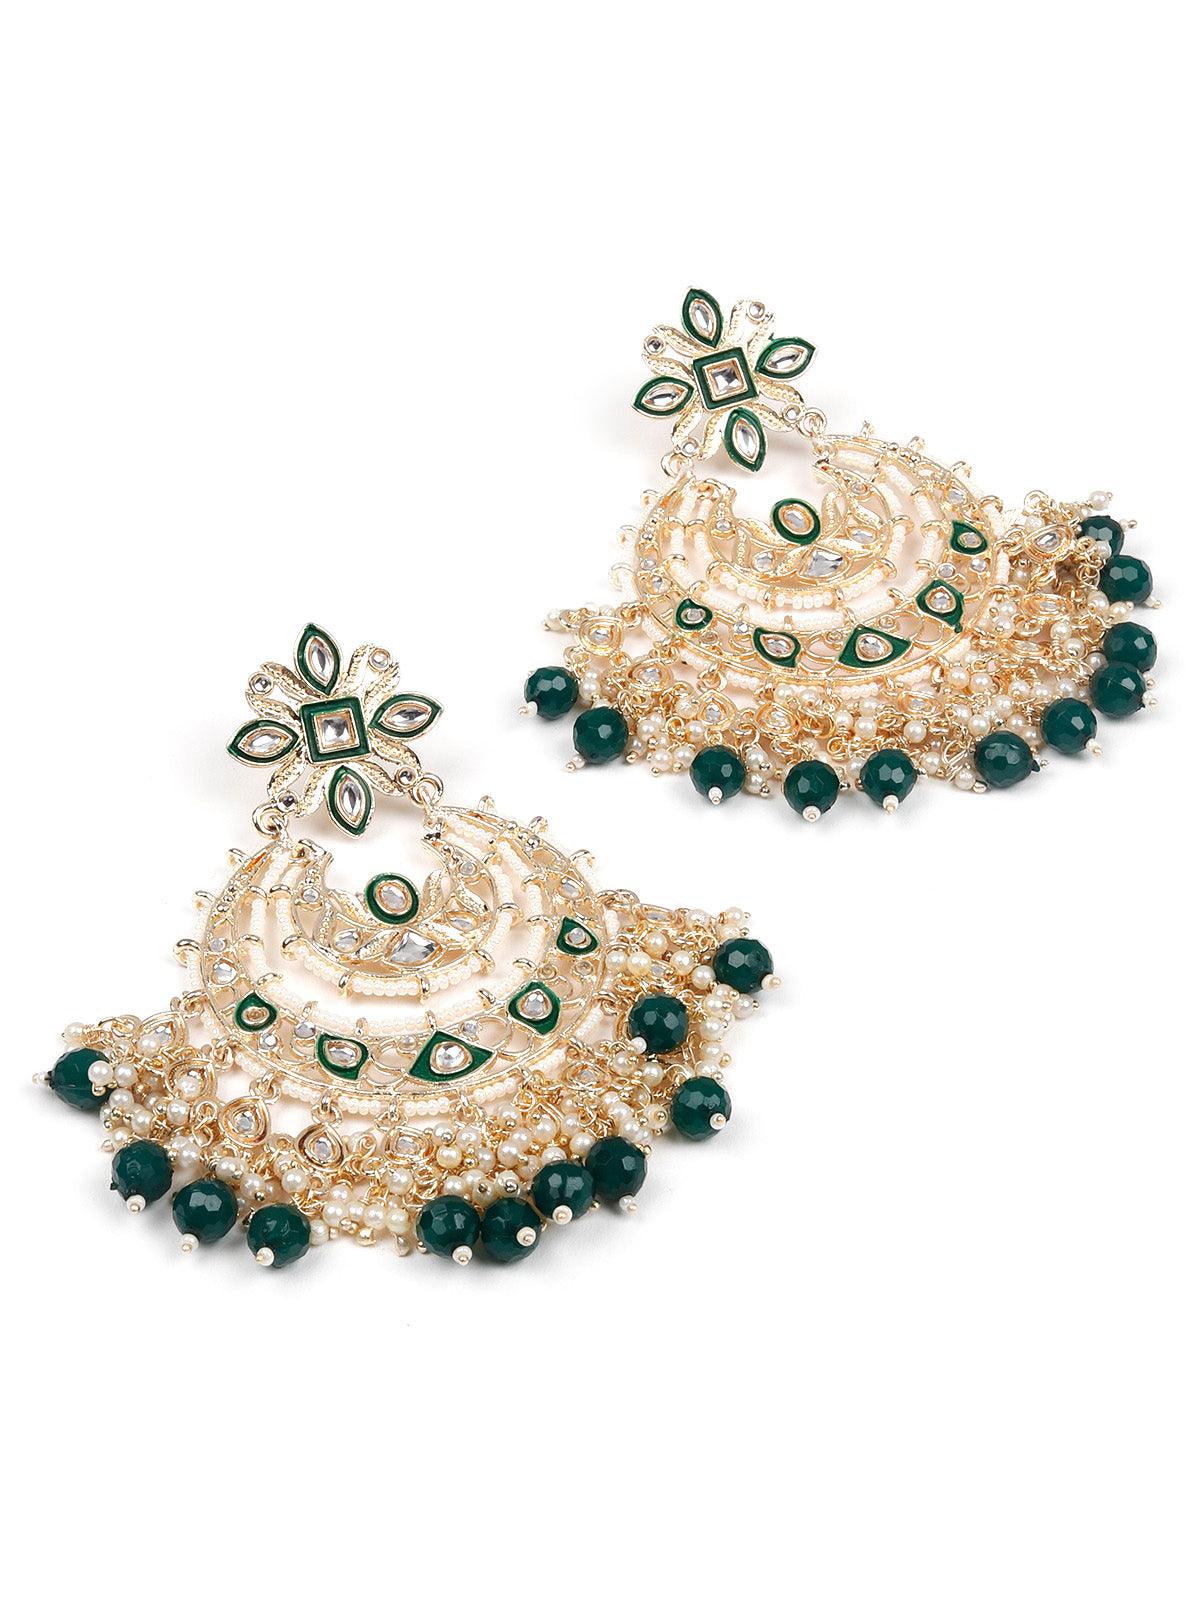 Women's The Gorgeous White And Green Chandbali Earrings - Odette